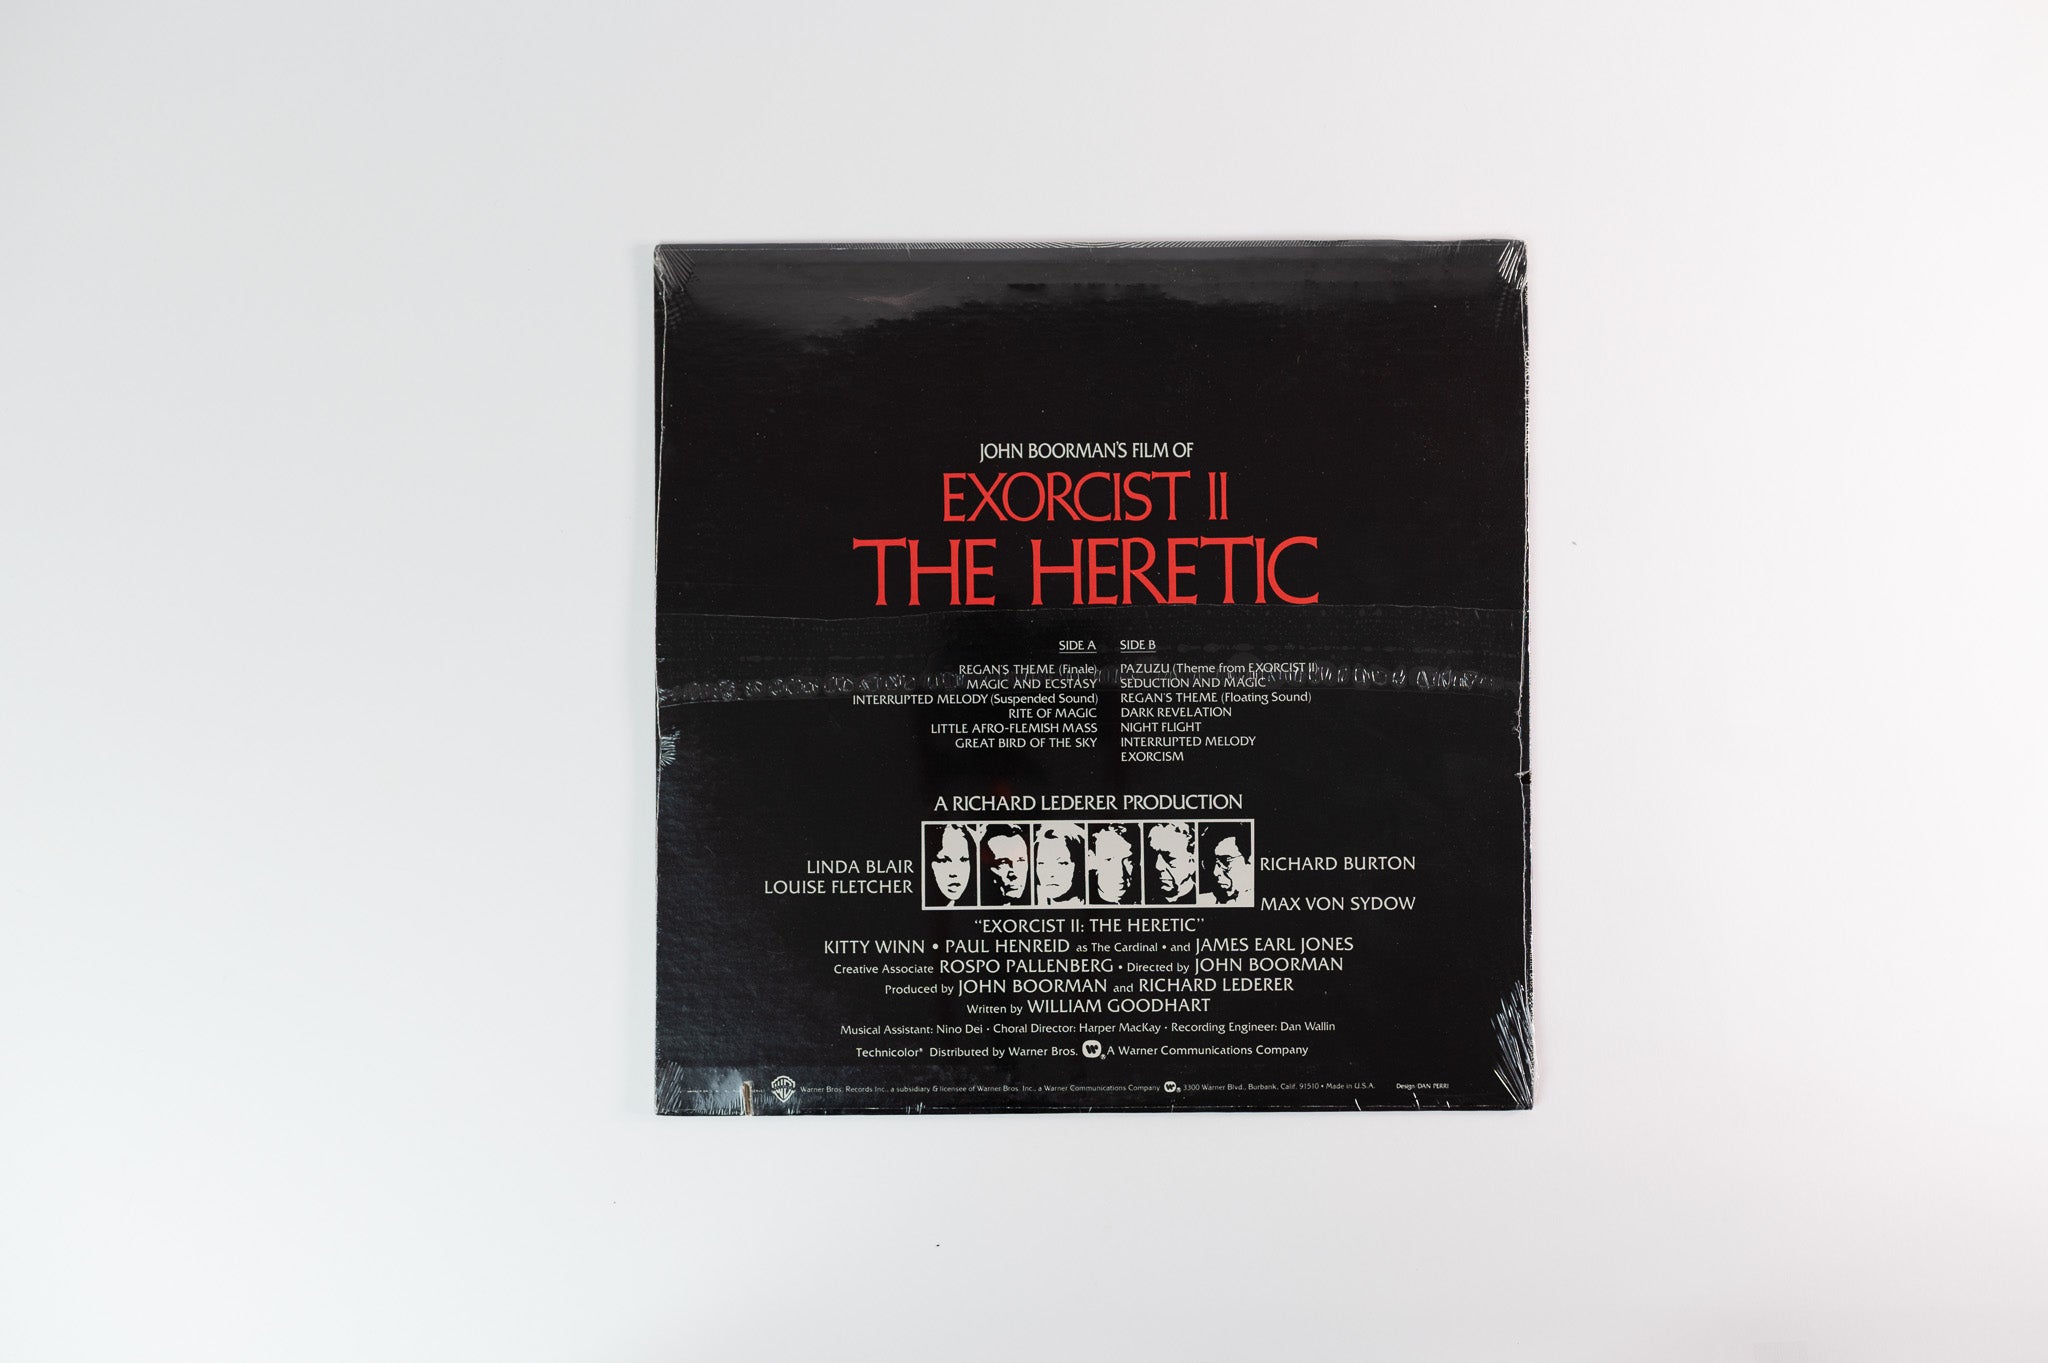 Ennio Morricone - Exorcist II: The Heretic on Warner Bros. Records - Sealed